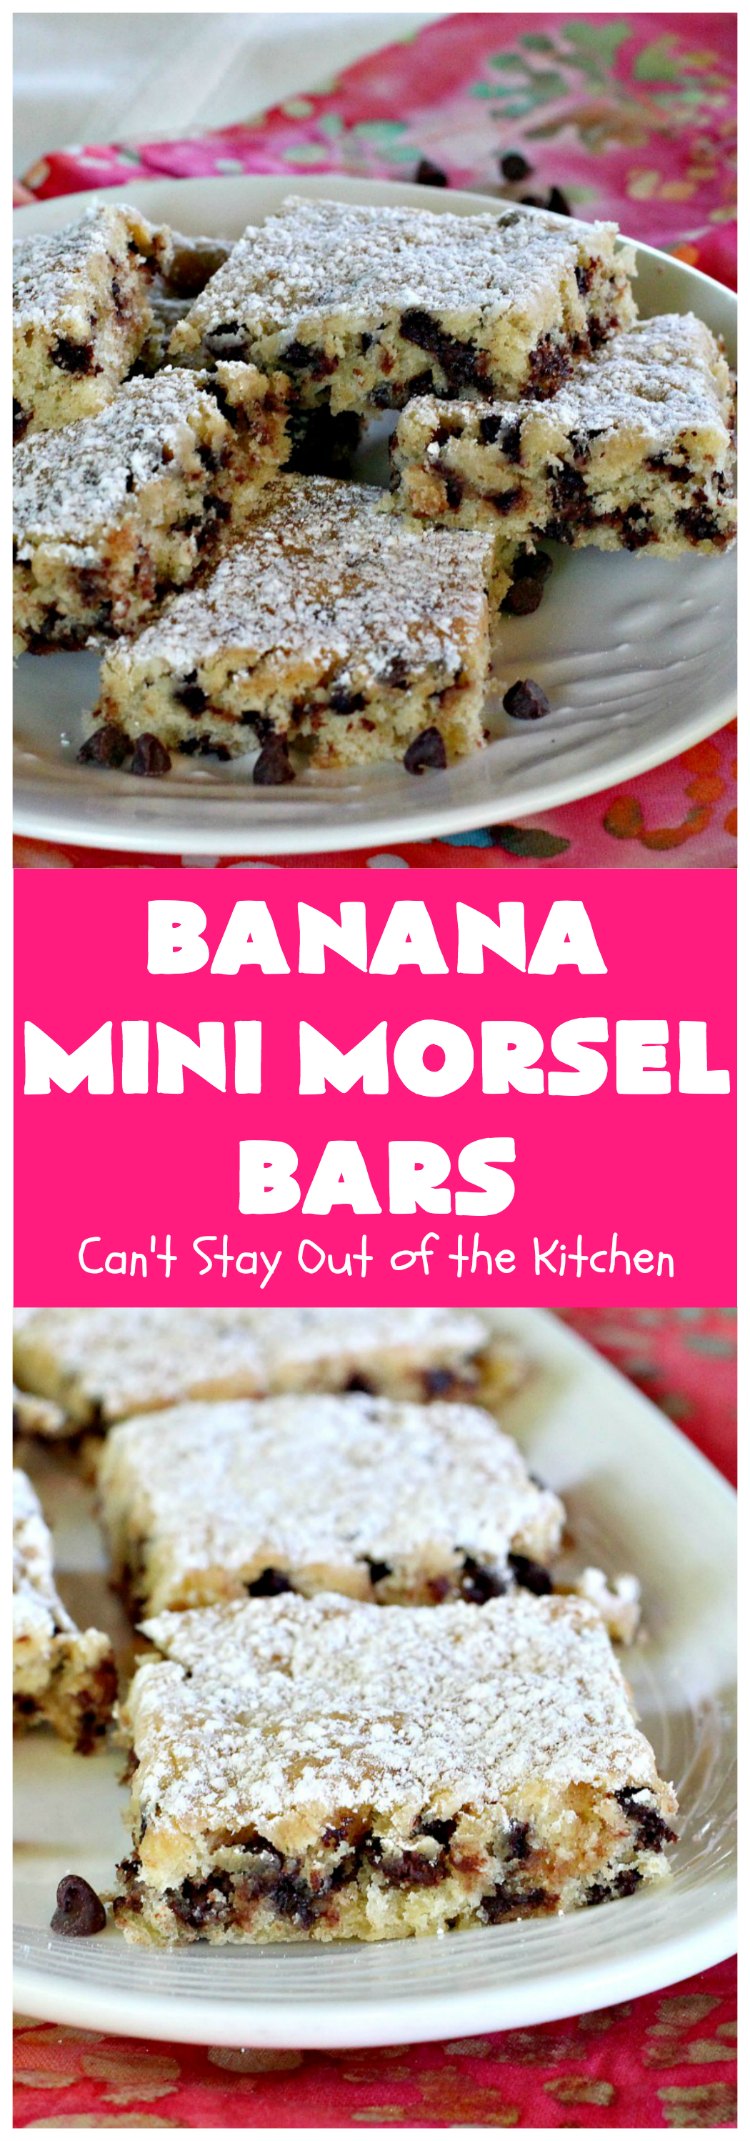 Banana Mini Morsel Bars | Can't Stay Out of the Kitchen | these lovely #cookies feature miniature #ChocolateChips & #bananas. They're so easy to whip up. Plus they're terrific for #tailgating parties, potlucks, backyard BBQs or anytime you need to whip up a quick #dessert. #BananaDessert #ChocolateDessert #chocolate #BananaMiniMorselBars